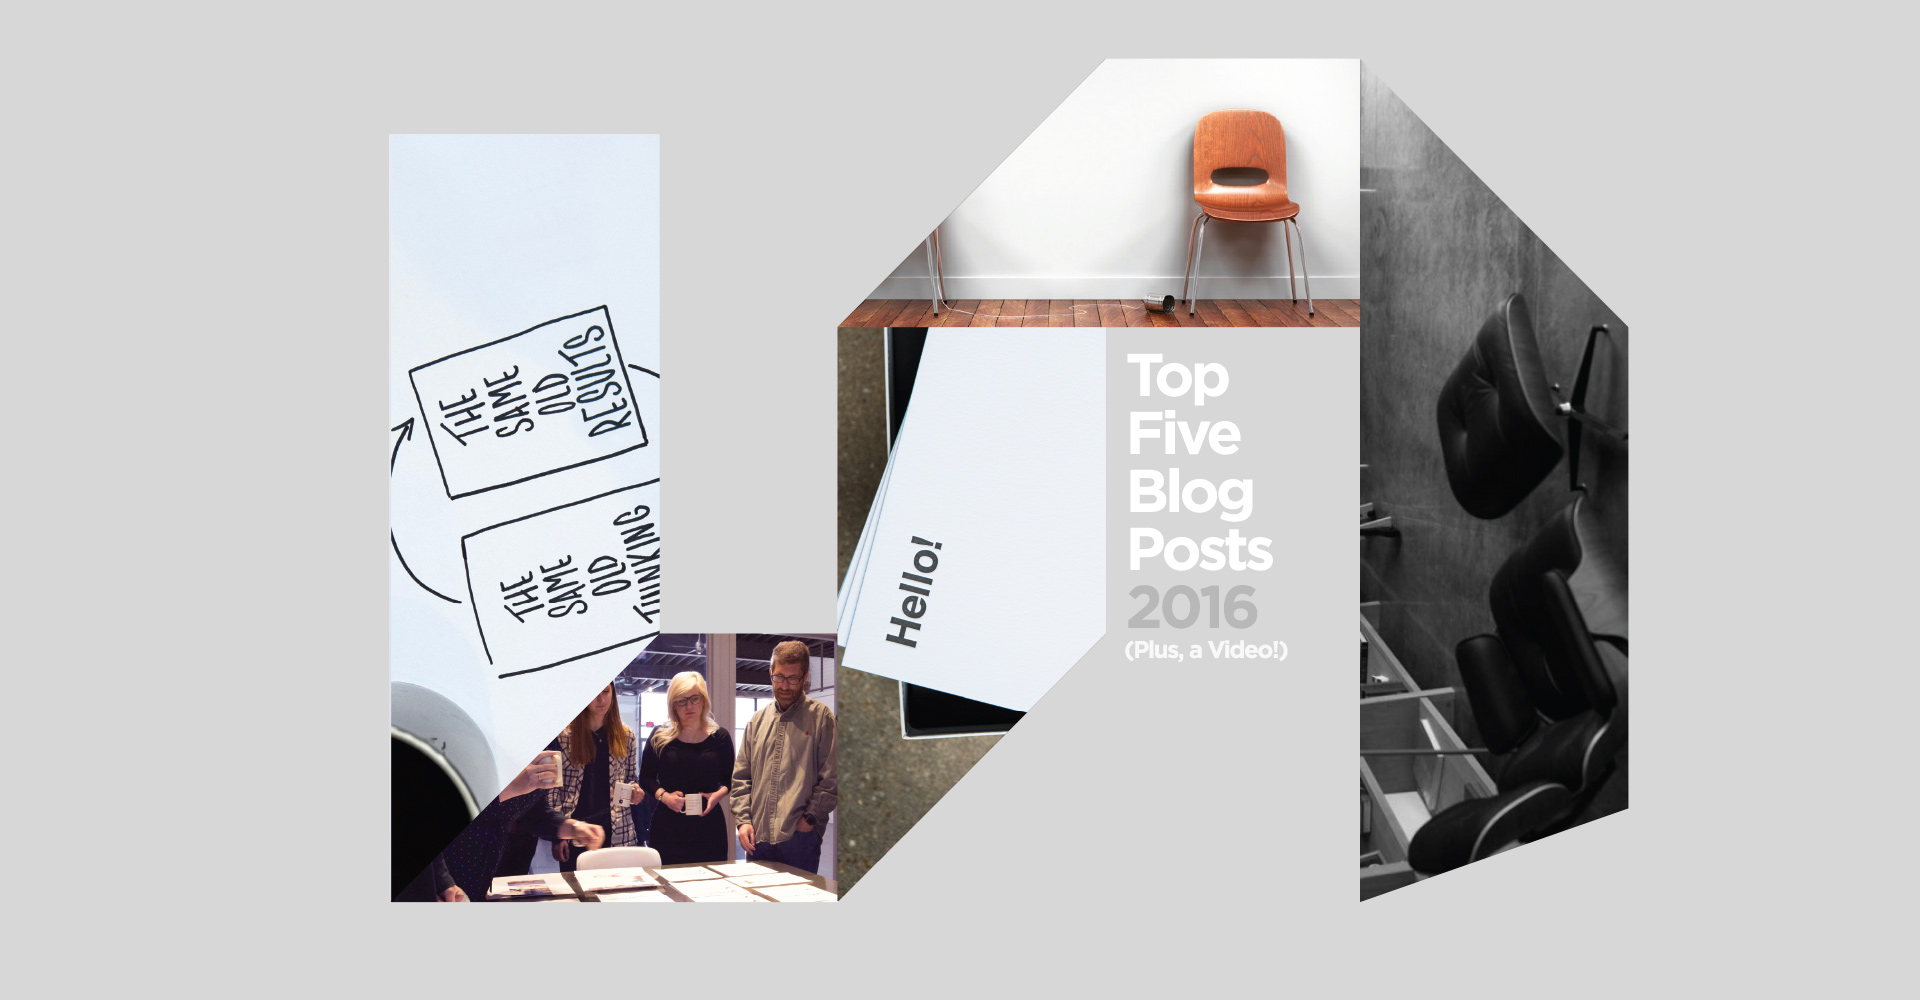 Top Five Blog Posts from Atomicdust - 2016